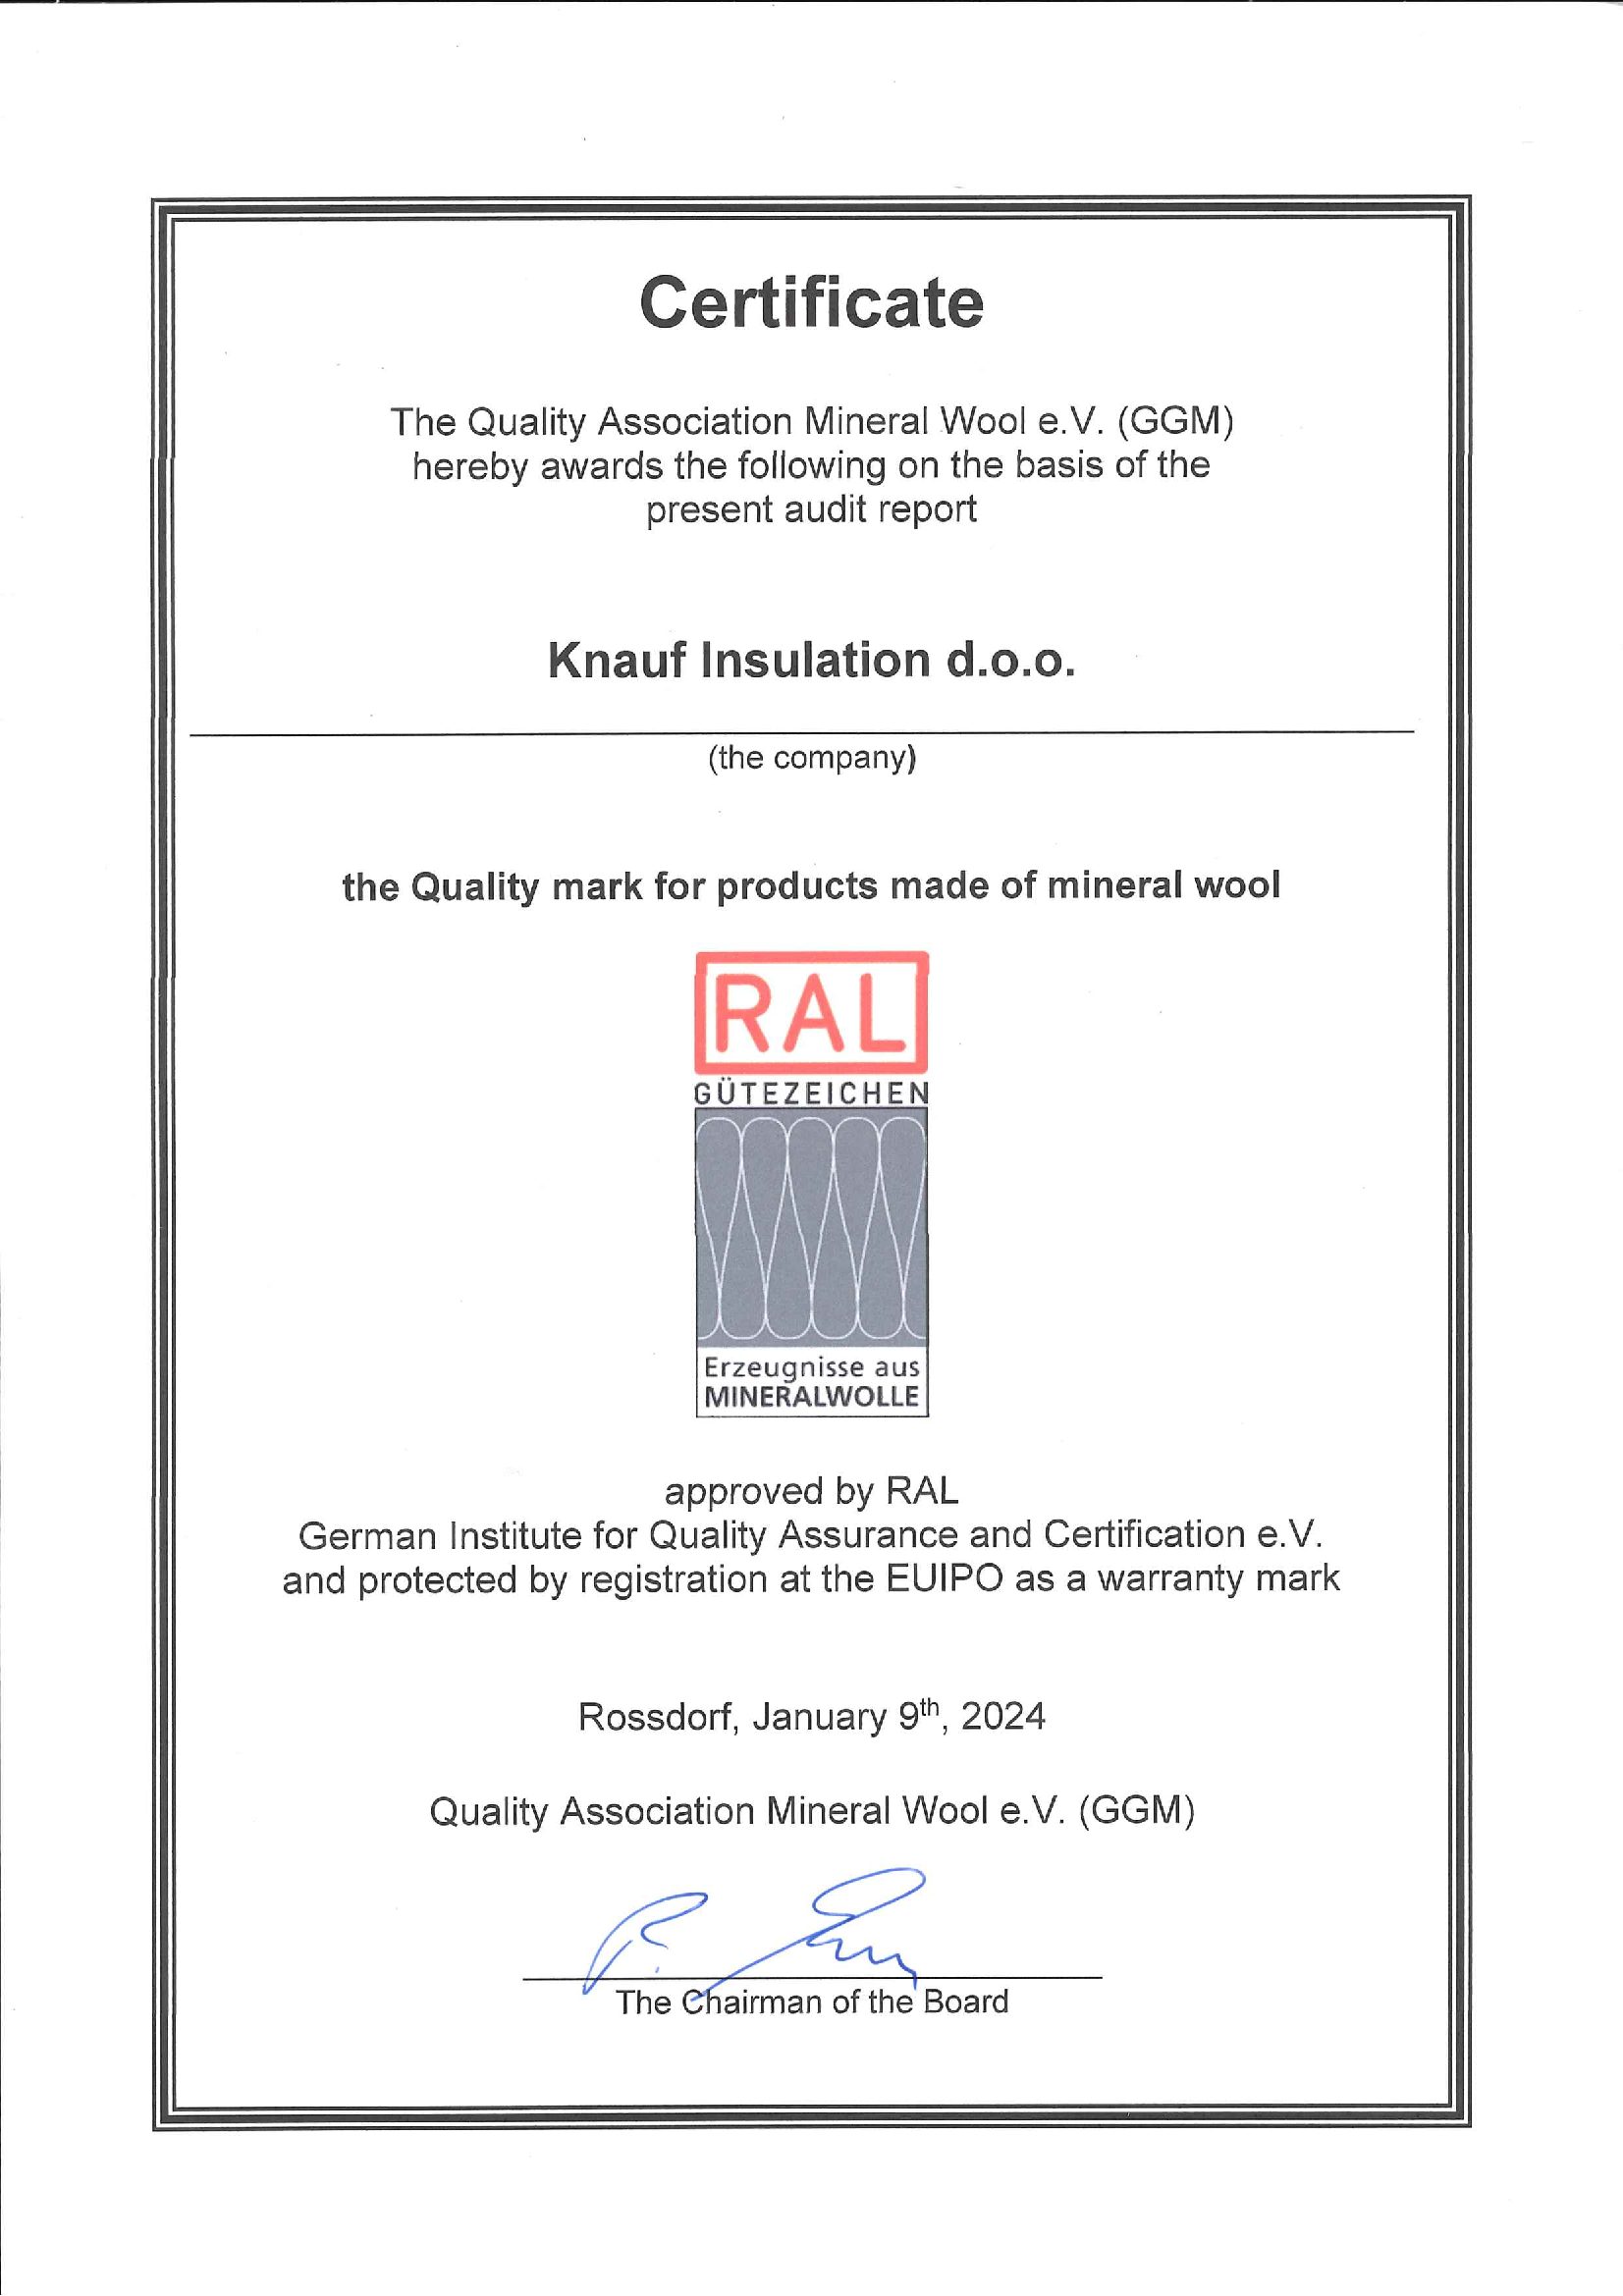 Certificate RAL for MW products